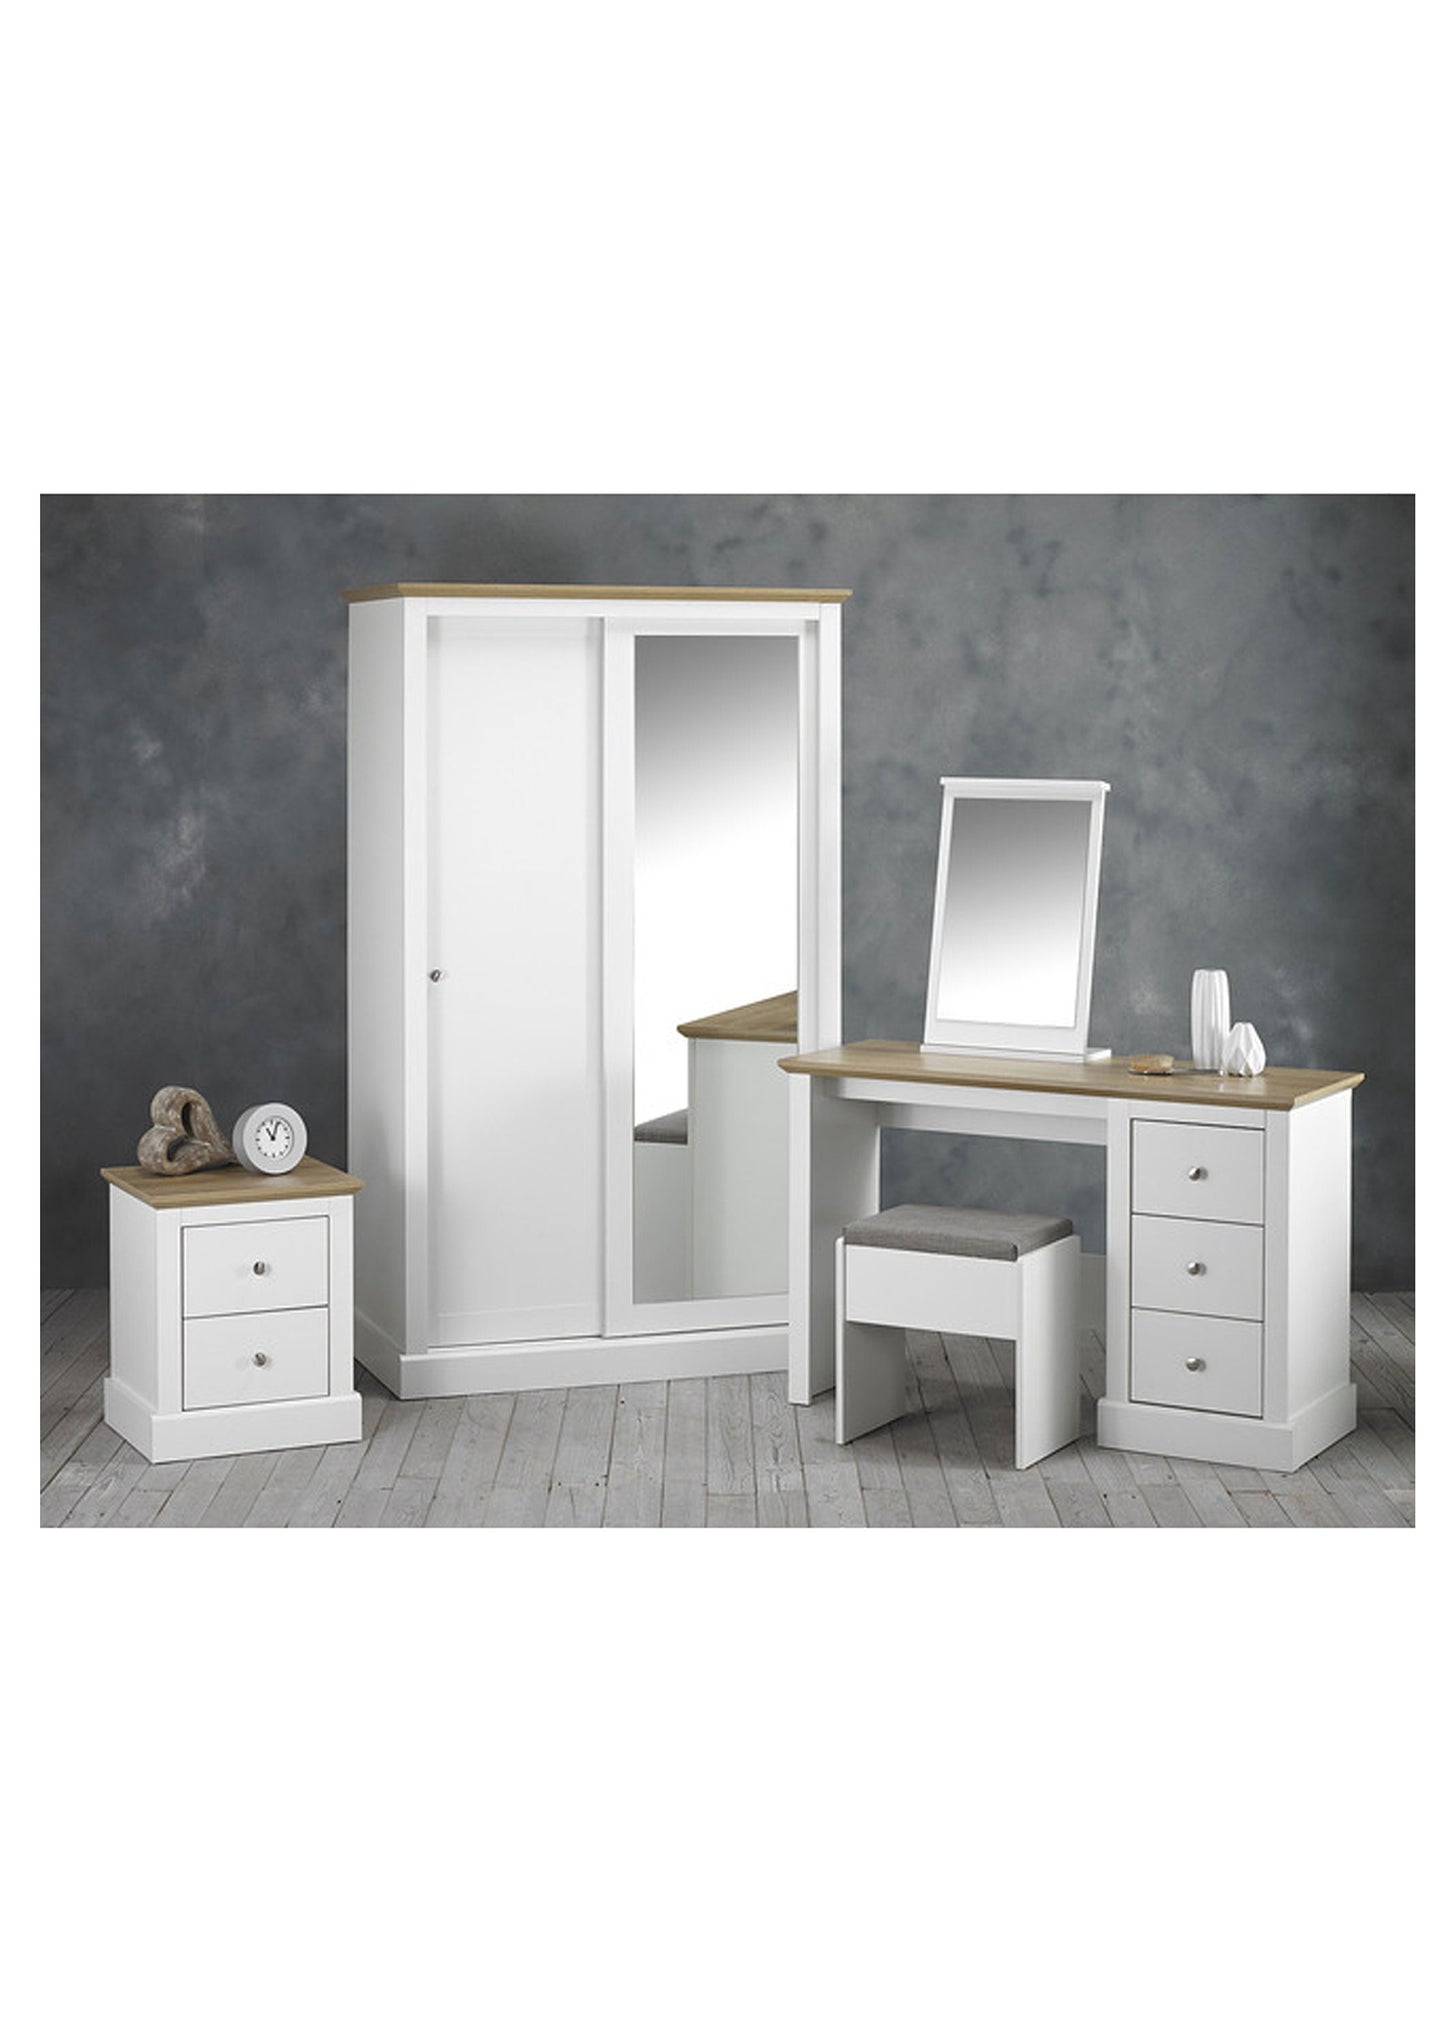 Wooden Sliding Wardrobe In White With 2 Doors and Mirror